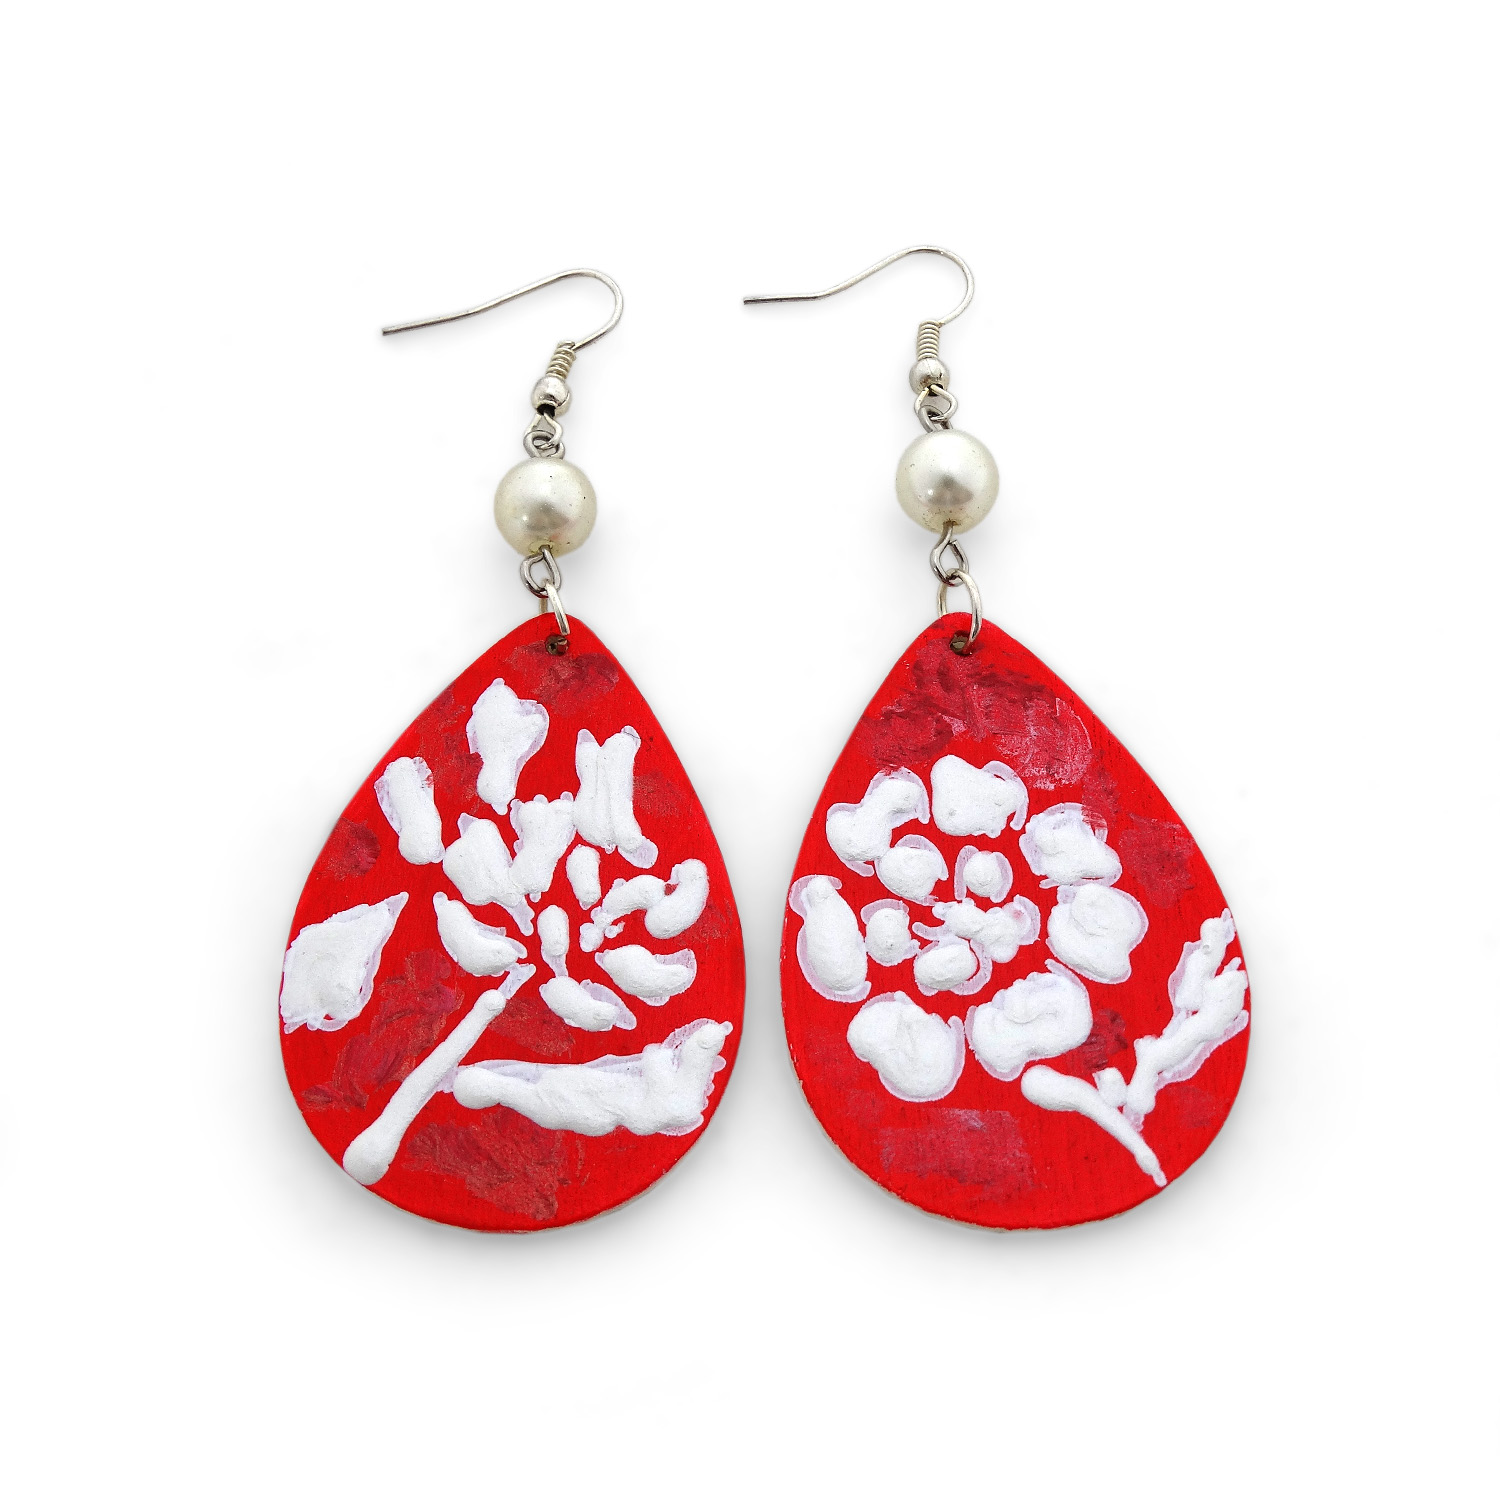 Hand-painted earrings - White on red